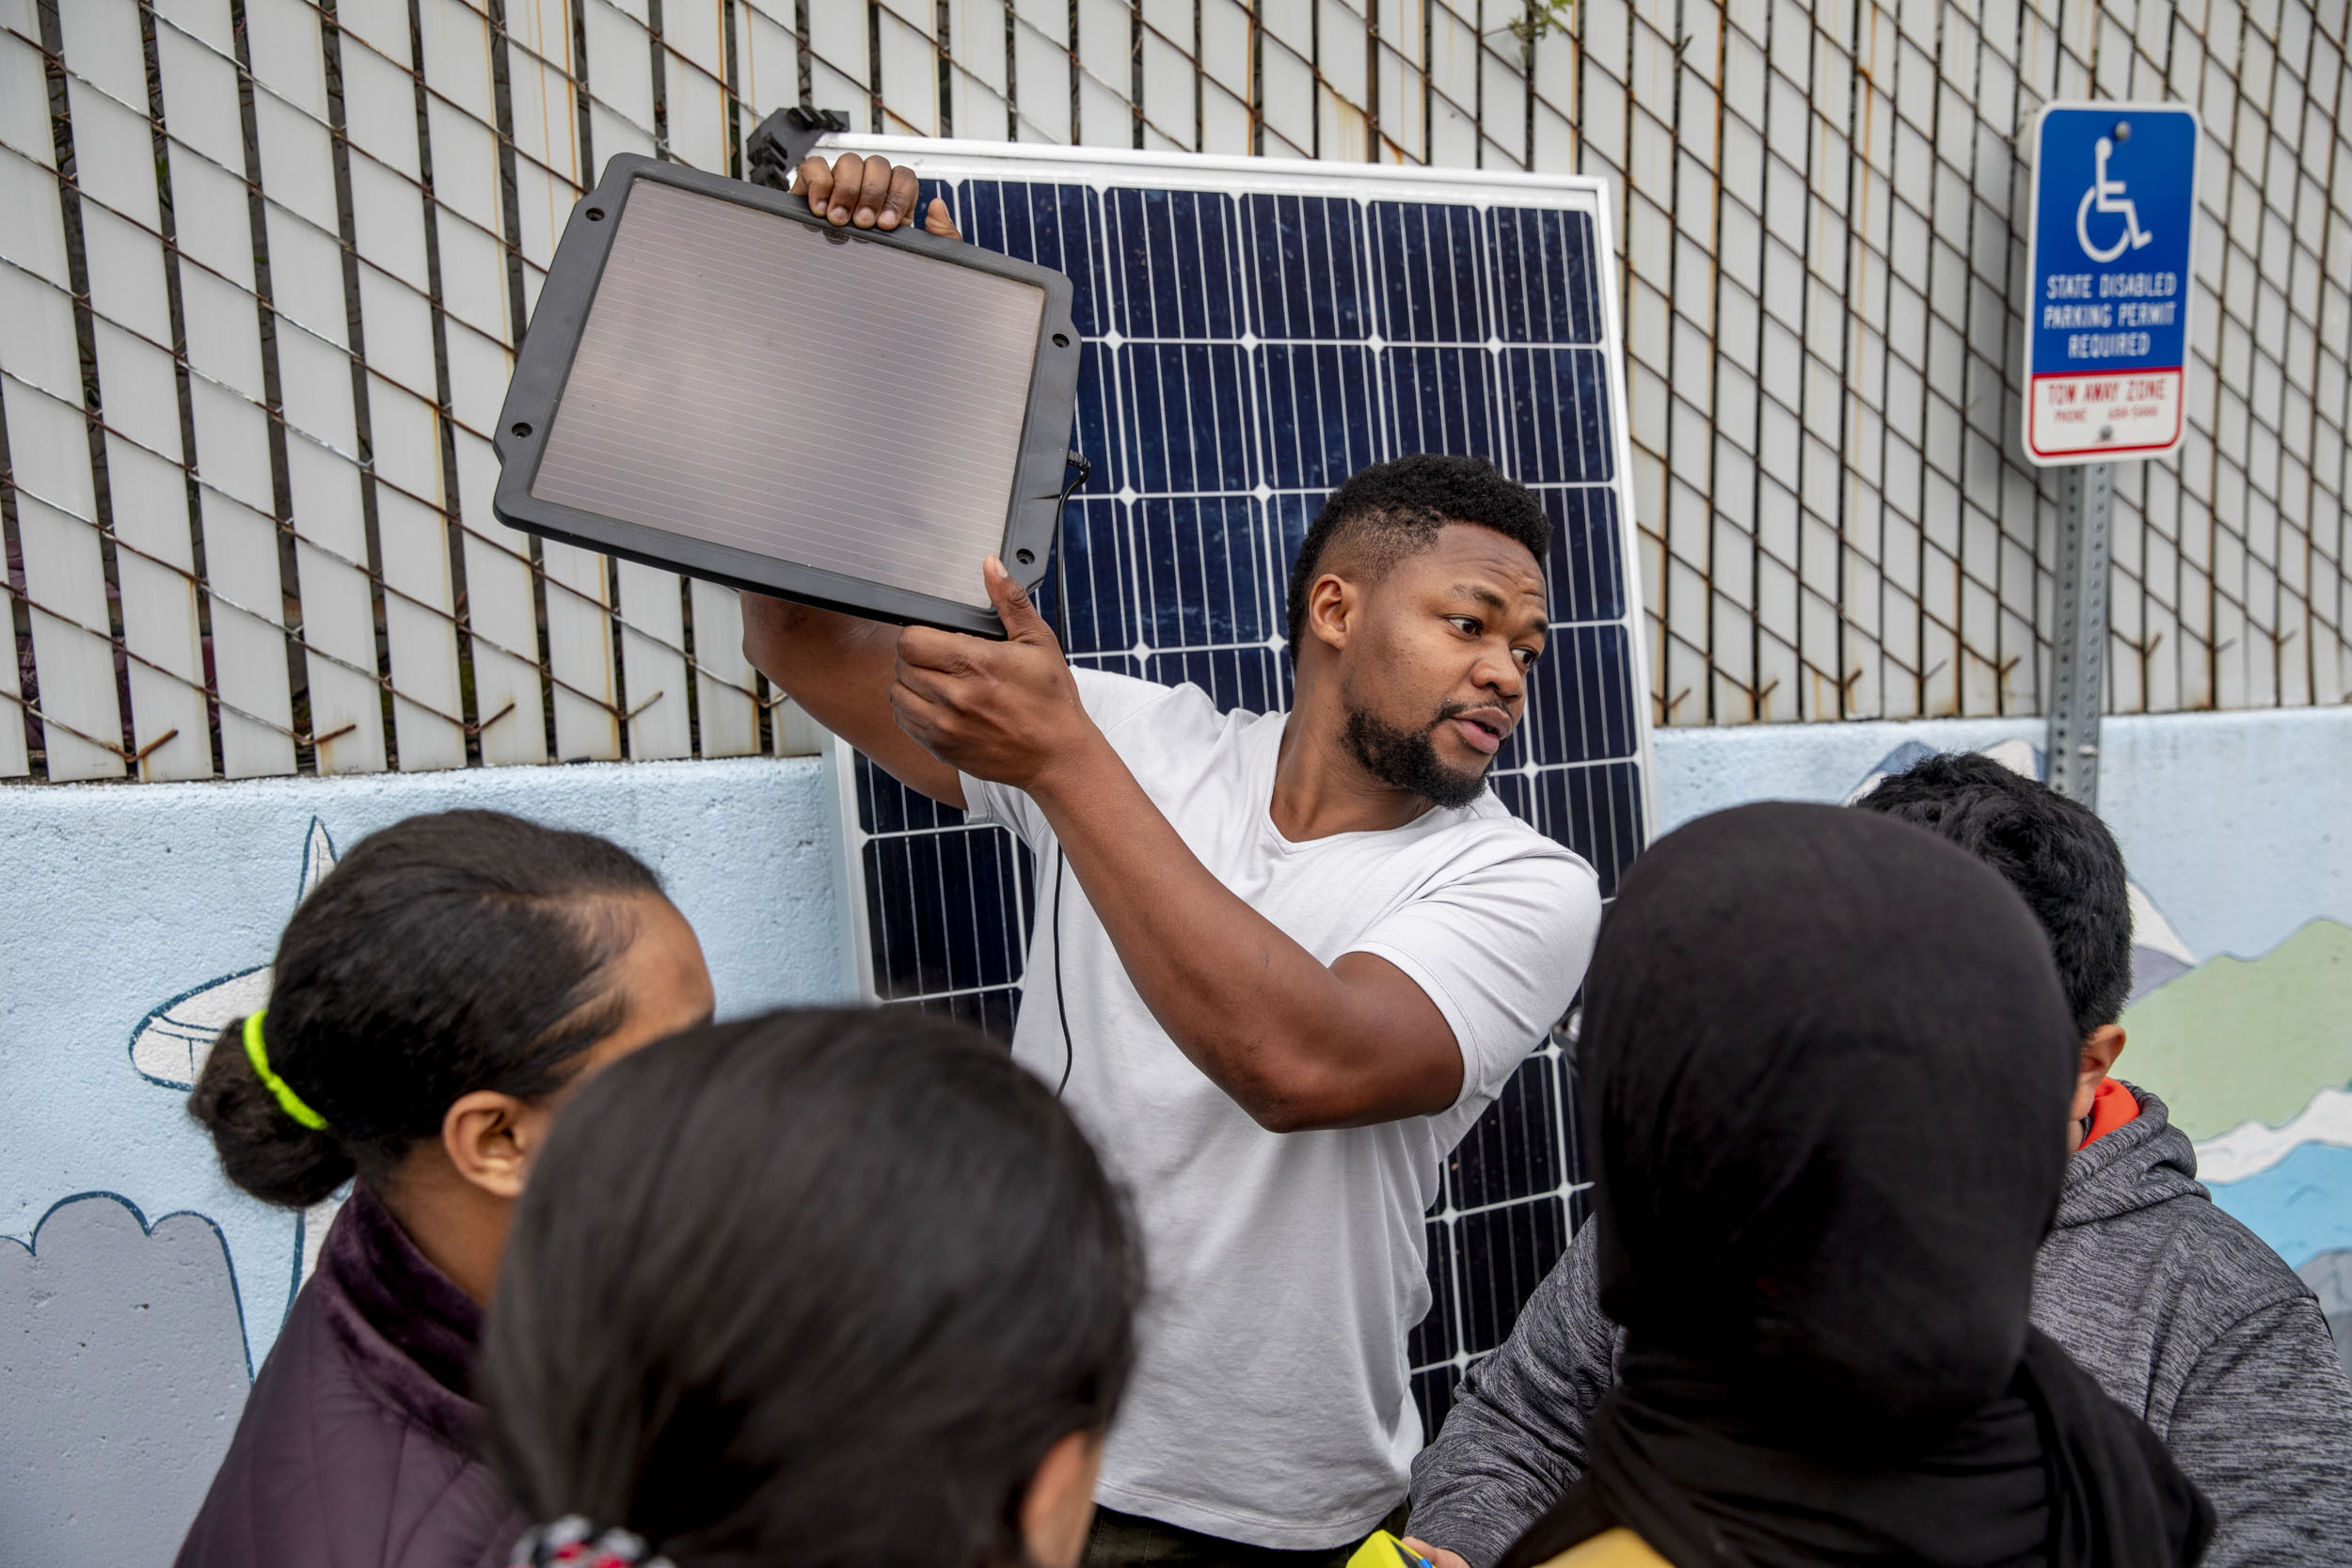  Edwin Wanji, center, teaches a group of kids from the Lake City Young Leaders program about how to work a solar panel at the Lake City Community Center on April 1. Wanji is the owner and founder of Sphere Solar Energy in Seattle and is often invited to talk to students about opportunities in solar. "I'm trying to create excitement around this field. It's renewable energy, it's exciting, there will always be more sunlight tomorrow," he says. "It's encouraging to see the kids' excitement about it." (Photo by Dorothy Edwards/Crosscut)